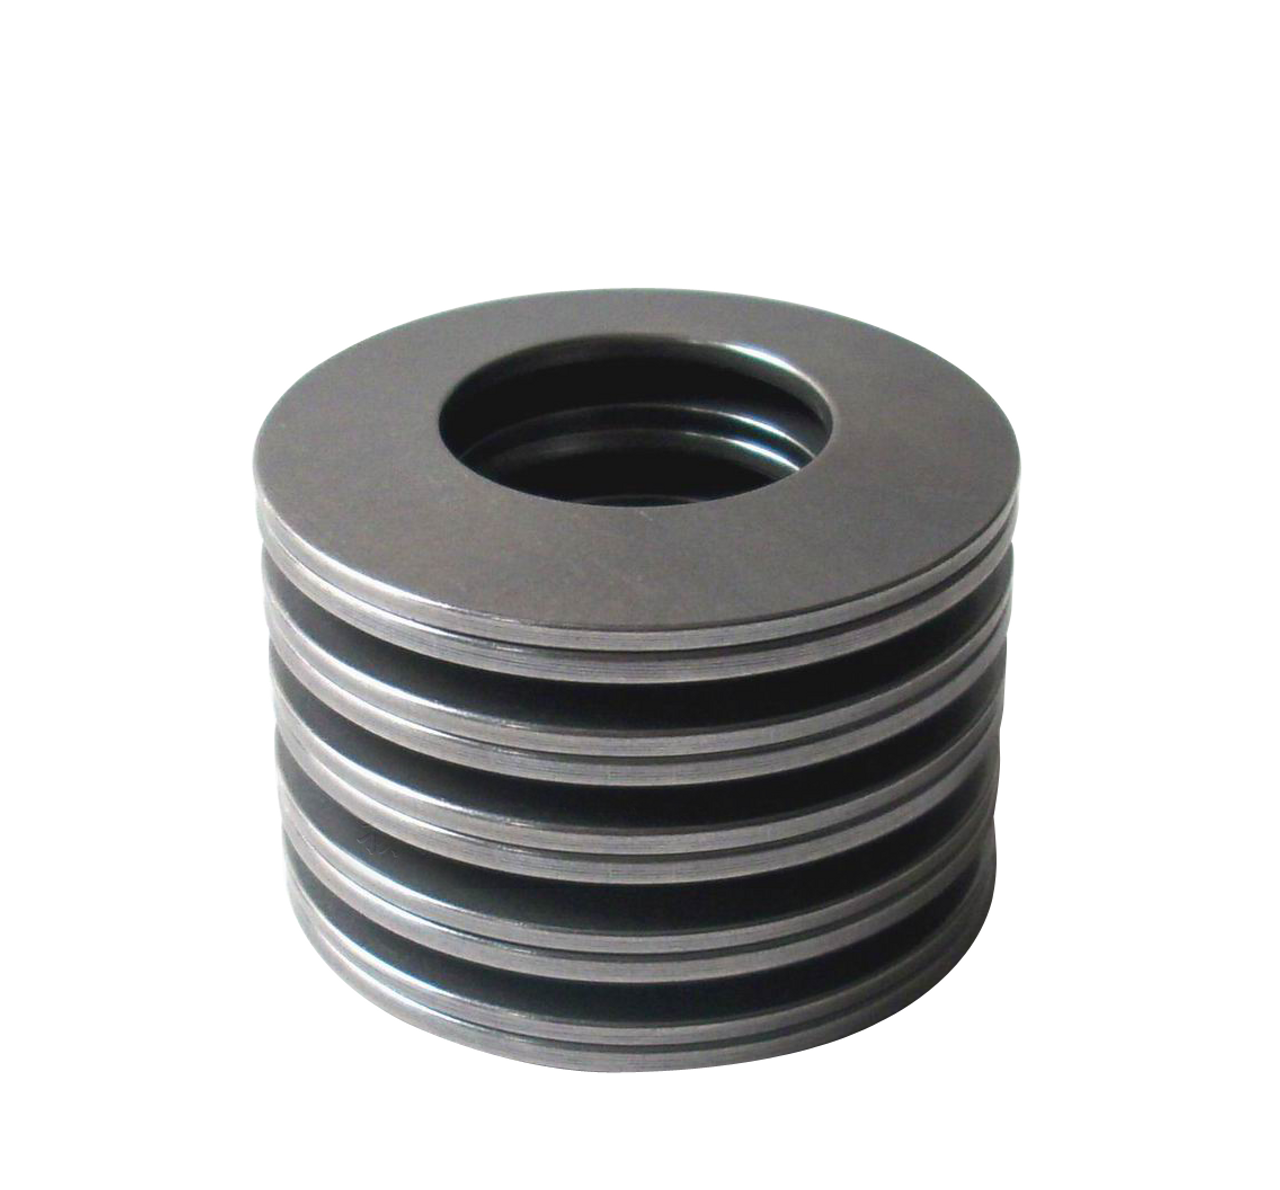 125mm Disc Spring (DIN 2093) Conical Washer  DS127.0-250-09